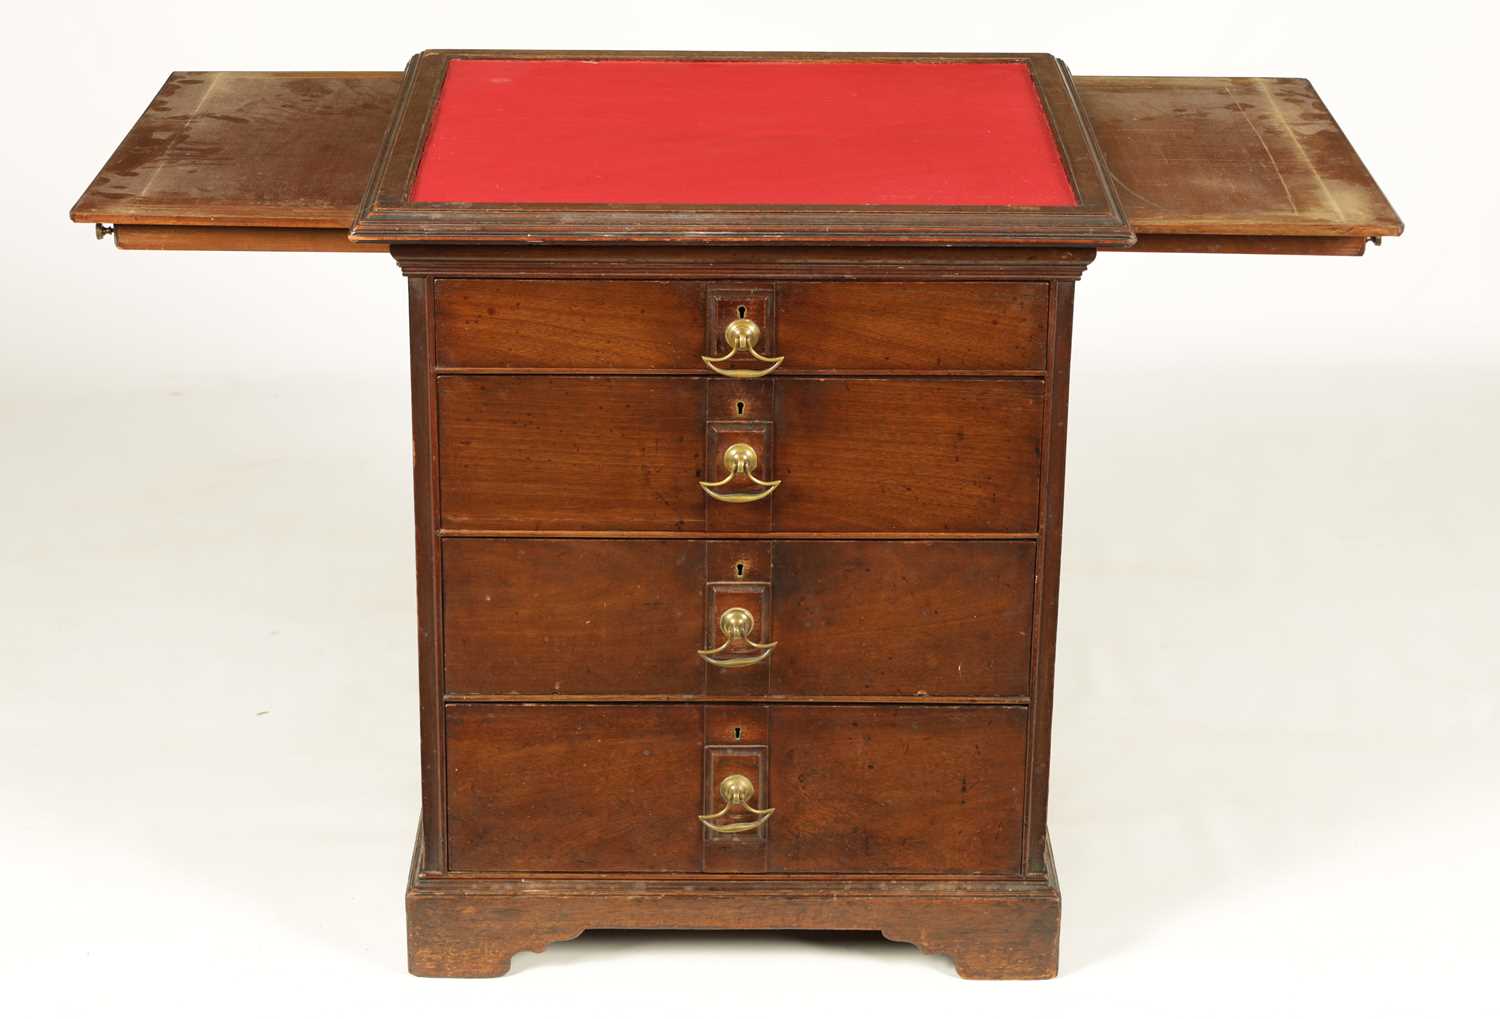 AN UNUSUAL LATE 19TH CENTURY WALNUT SMALL CHEST OF DRAWERS BY E. WALKER CABINETMAKER AND DATED 1893 - Image 4 of 7